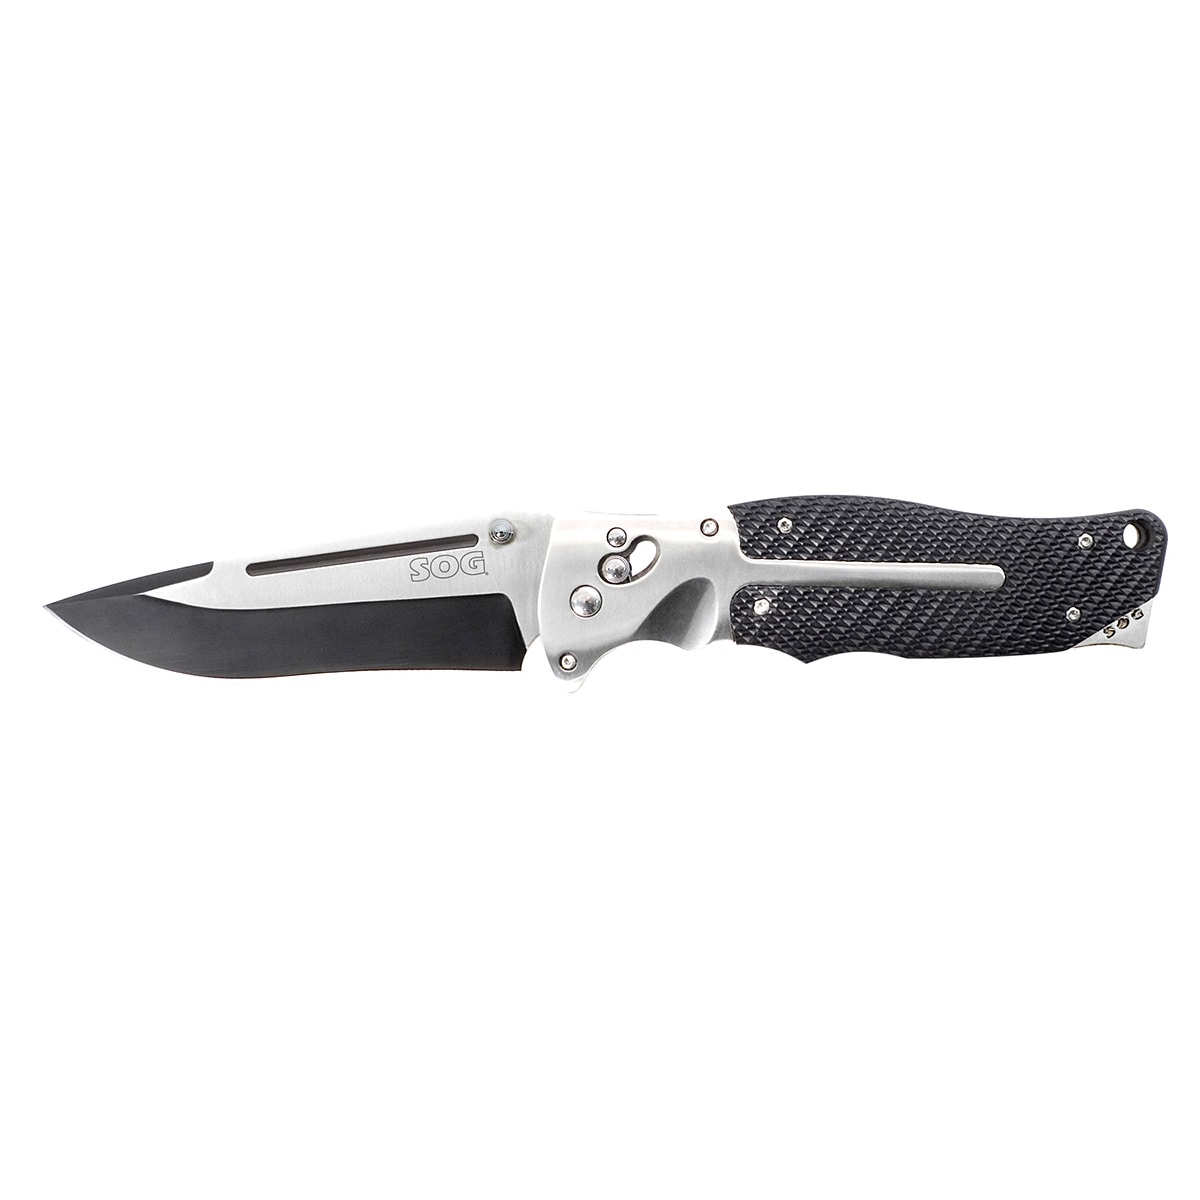 Sog Fatcat Folding Knife (black, silverBlade materials VG10Handle materials KratonSOGs Arc Lock locking mechanismTwo tone satin and Black TiNi bladeLightweight titanium handle with Kraton gripBlade spins open effortlessly and locks up solidlyIncludes ny